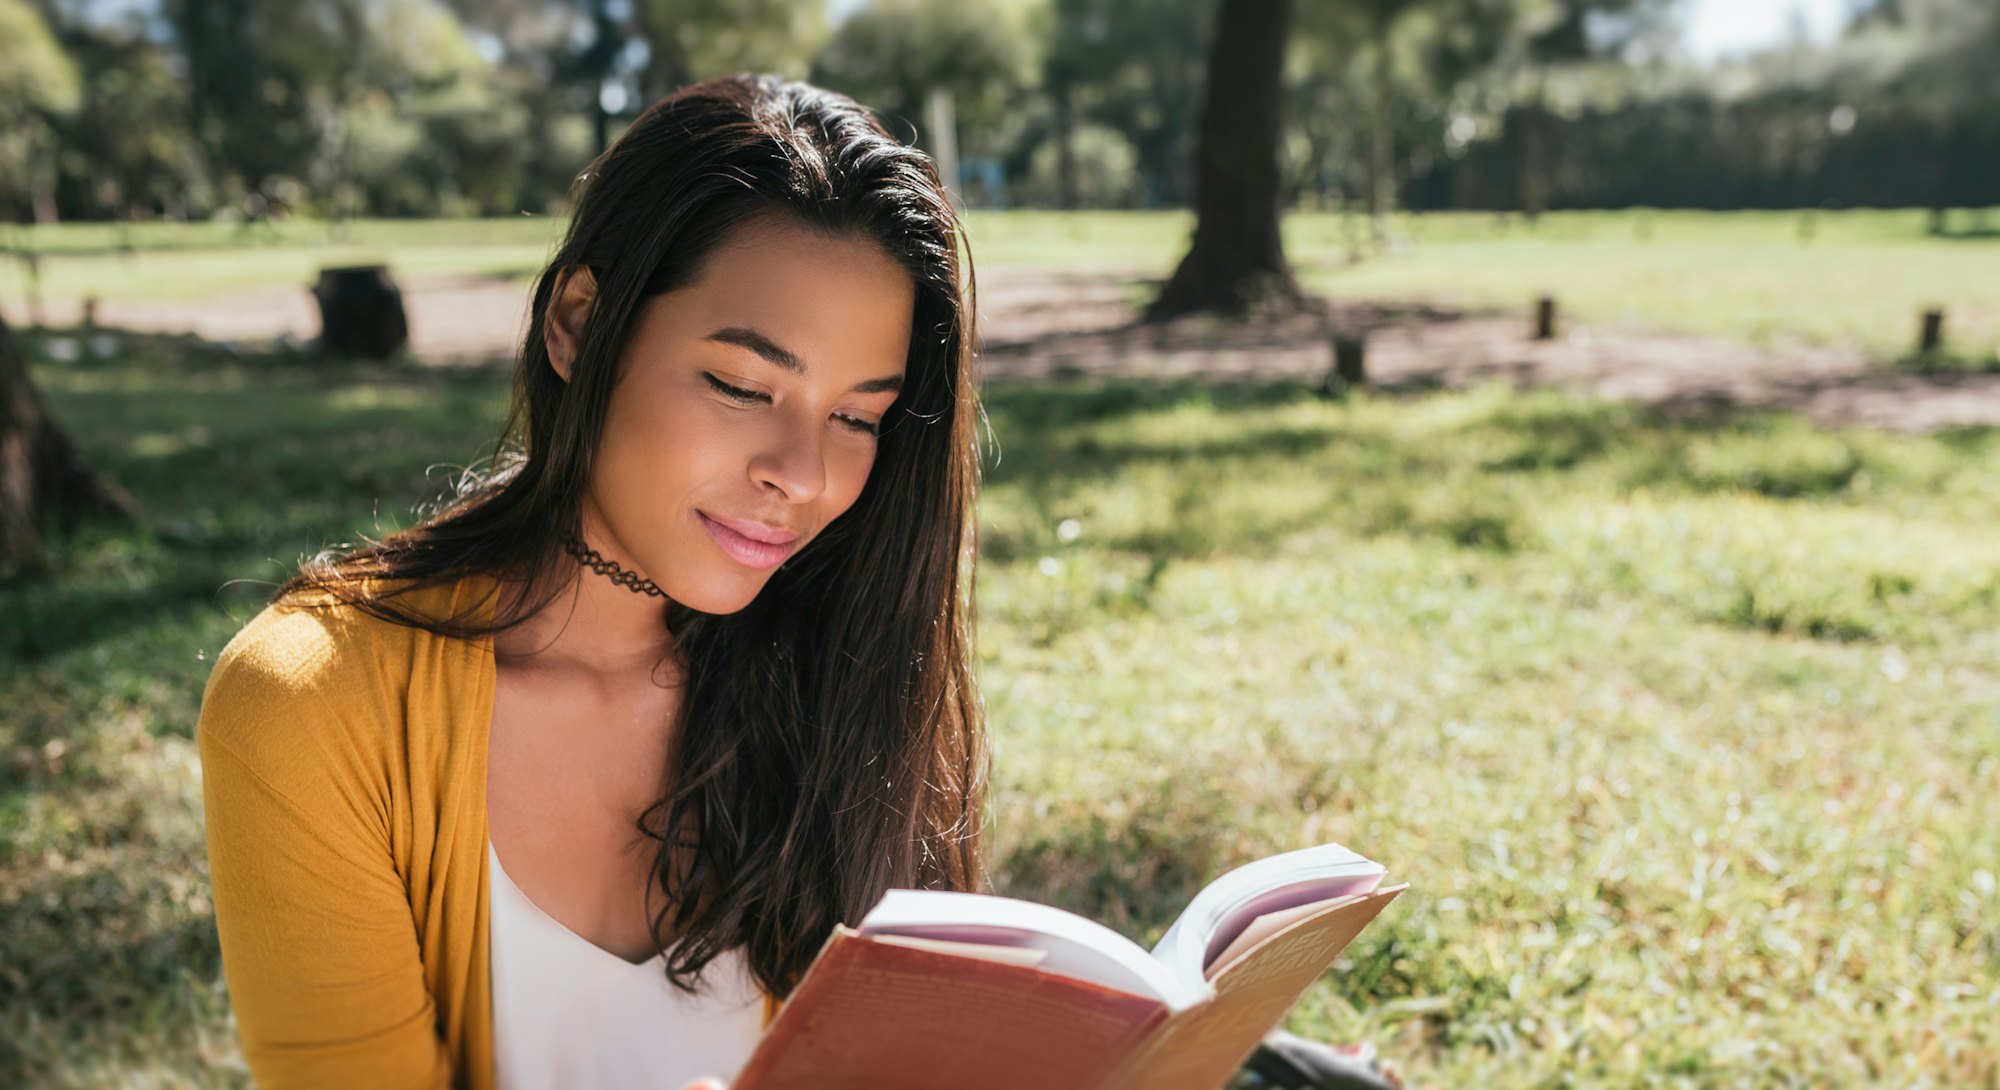 Young woman reading book while sitting in a park.